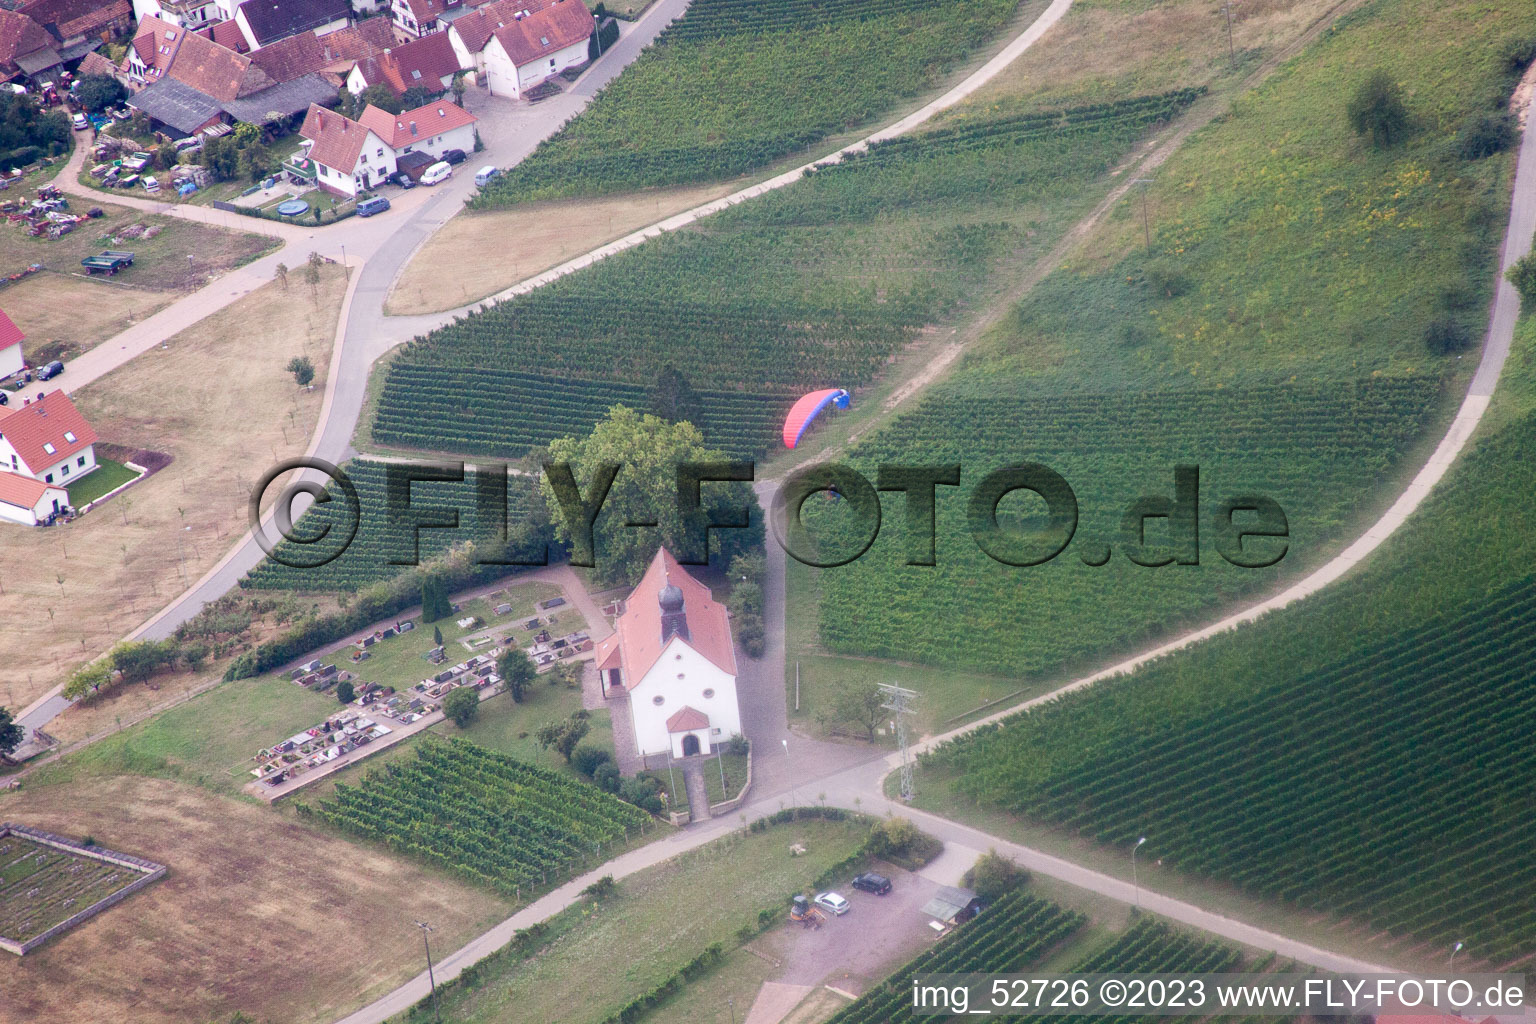 St. Dionysius Chapel with paraglider in the district Gleiszellen in Gleiszellen-Gleishorbach in the state Rhineland-Palatinate, Germany